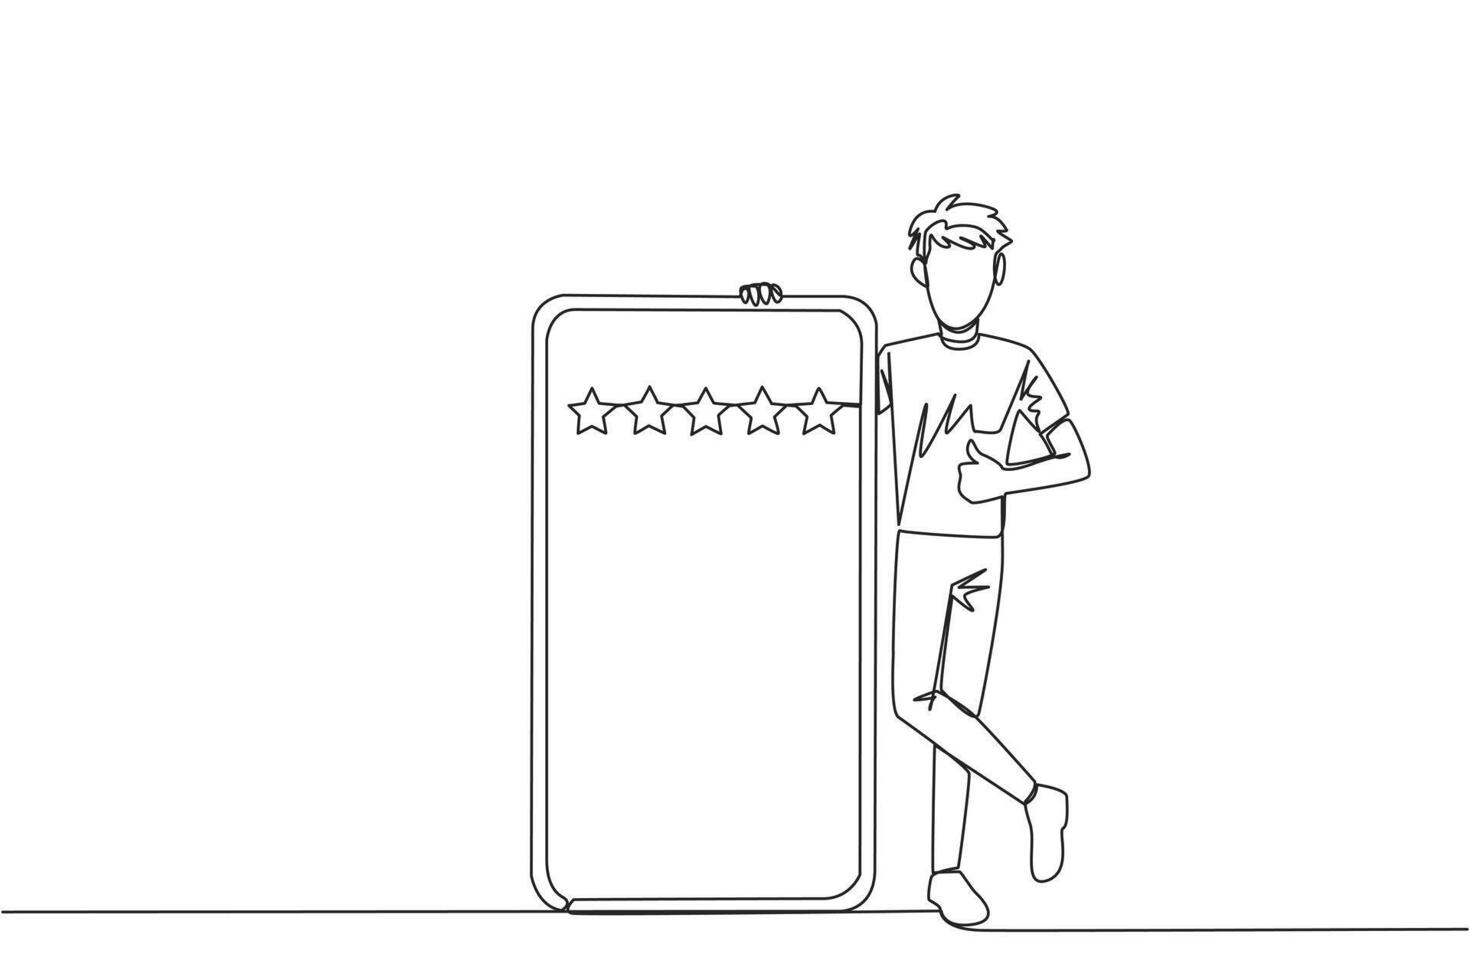 Single one line drawing young happy smiling man stands casually next to a large smartphone, other hand giving a thumbs up gesture. Give review 5 star. Continuous line design graphic illustration vector